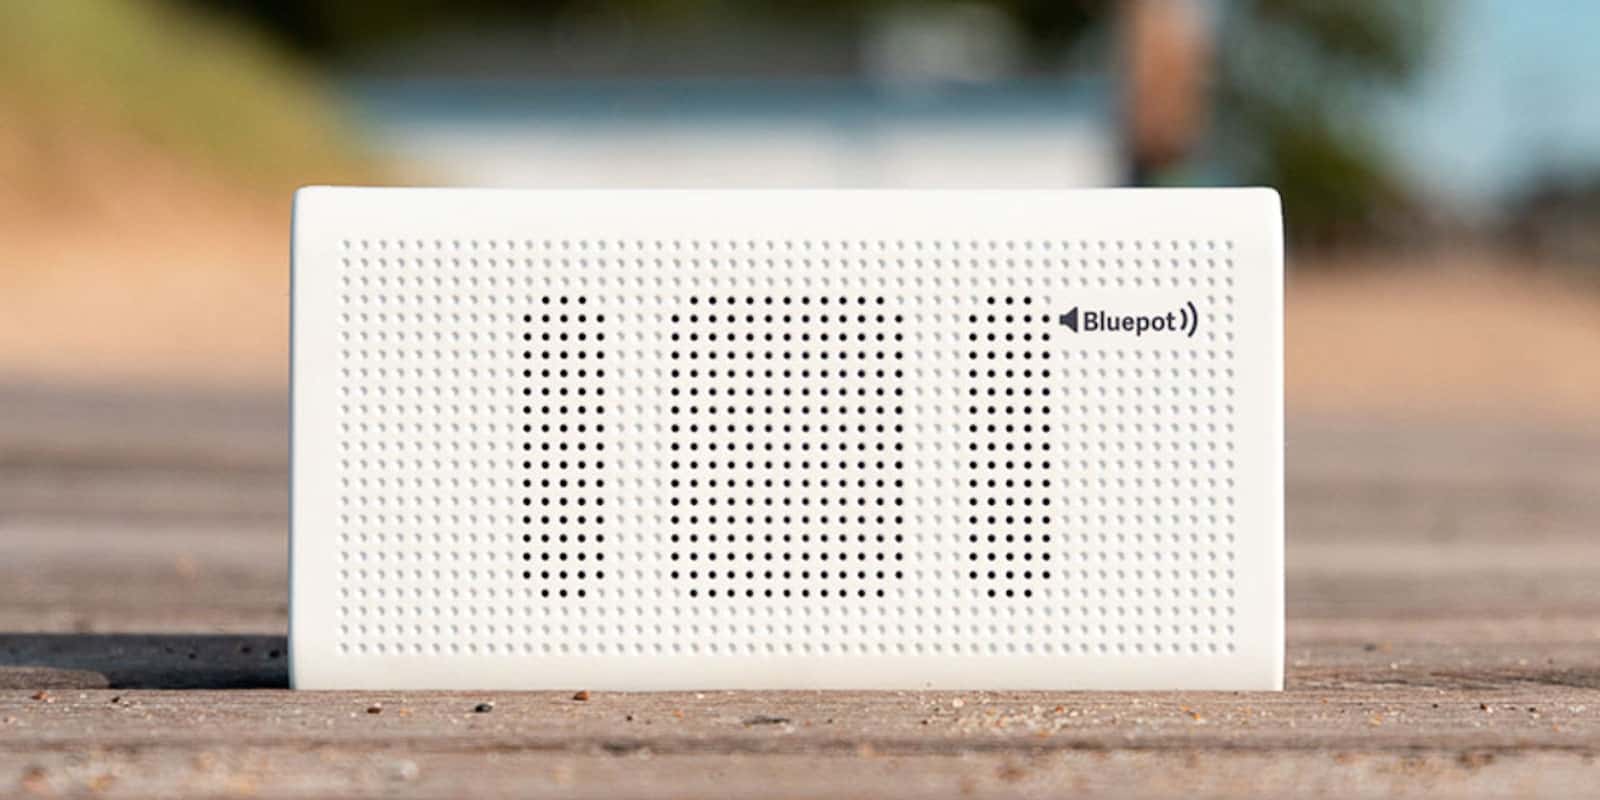 This slim Bluetooth speaker does double duty as a high capacity portable battery.